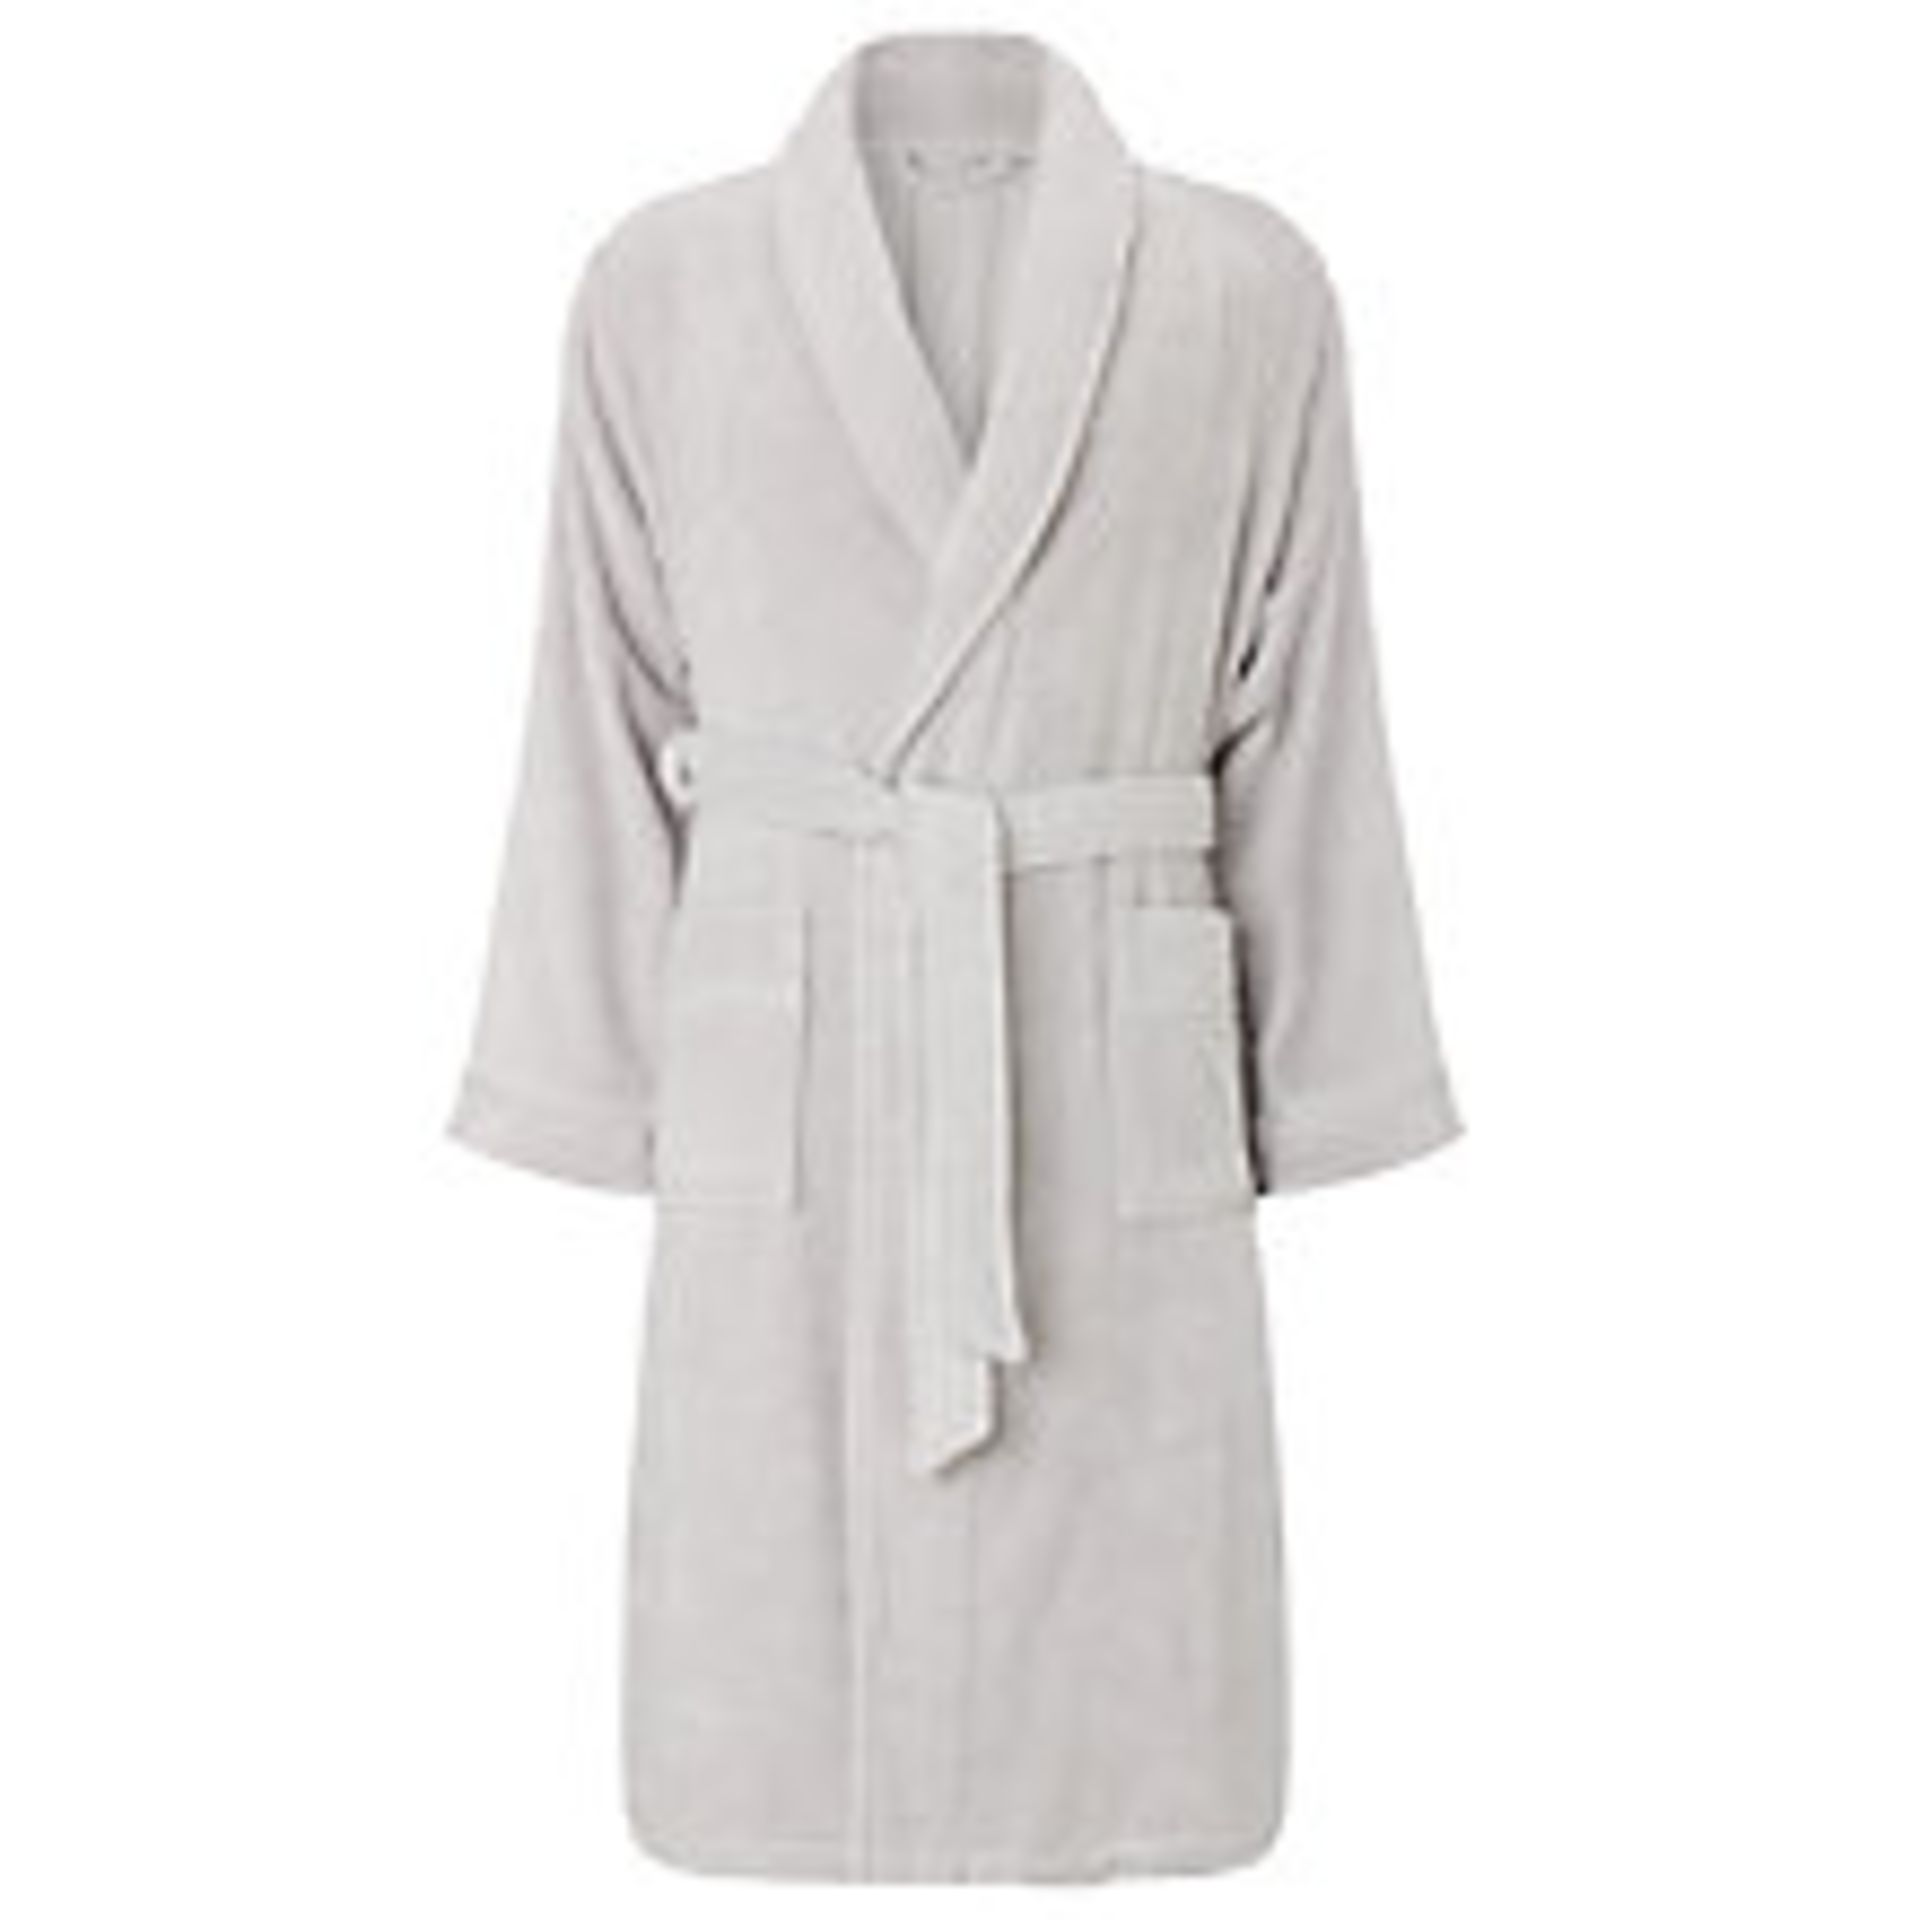 1 x SUPER SOFT AND COSY COTTON DRESSING GOWN IN SILVER SIZE SMALL TO MEDIUM RRP £45 18.07.17 *PLEASE